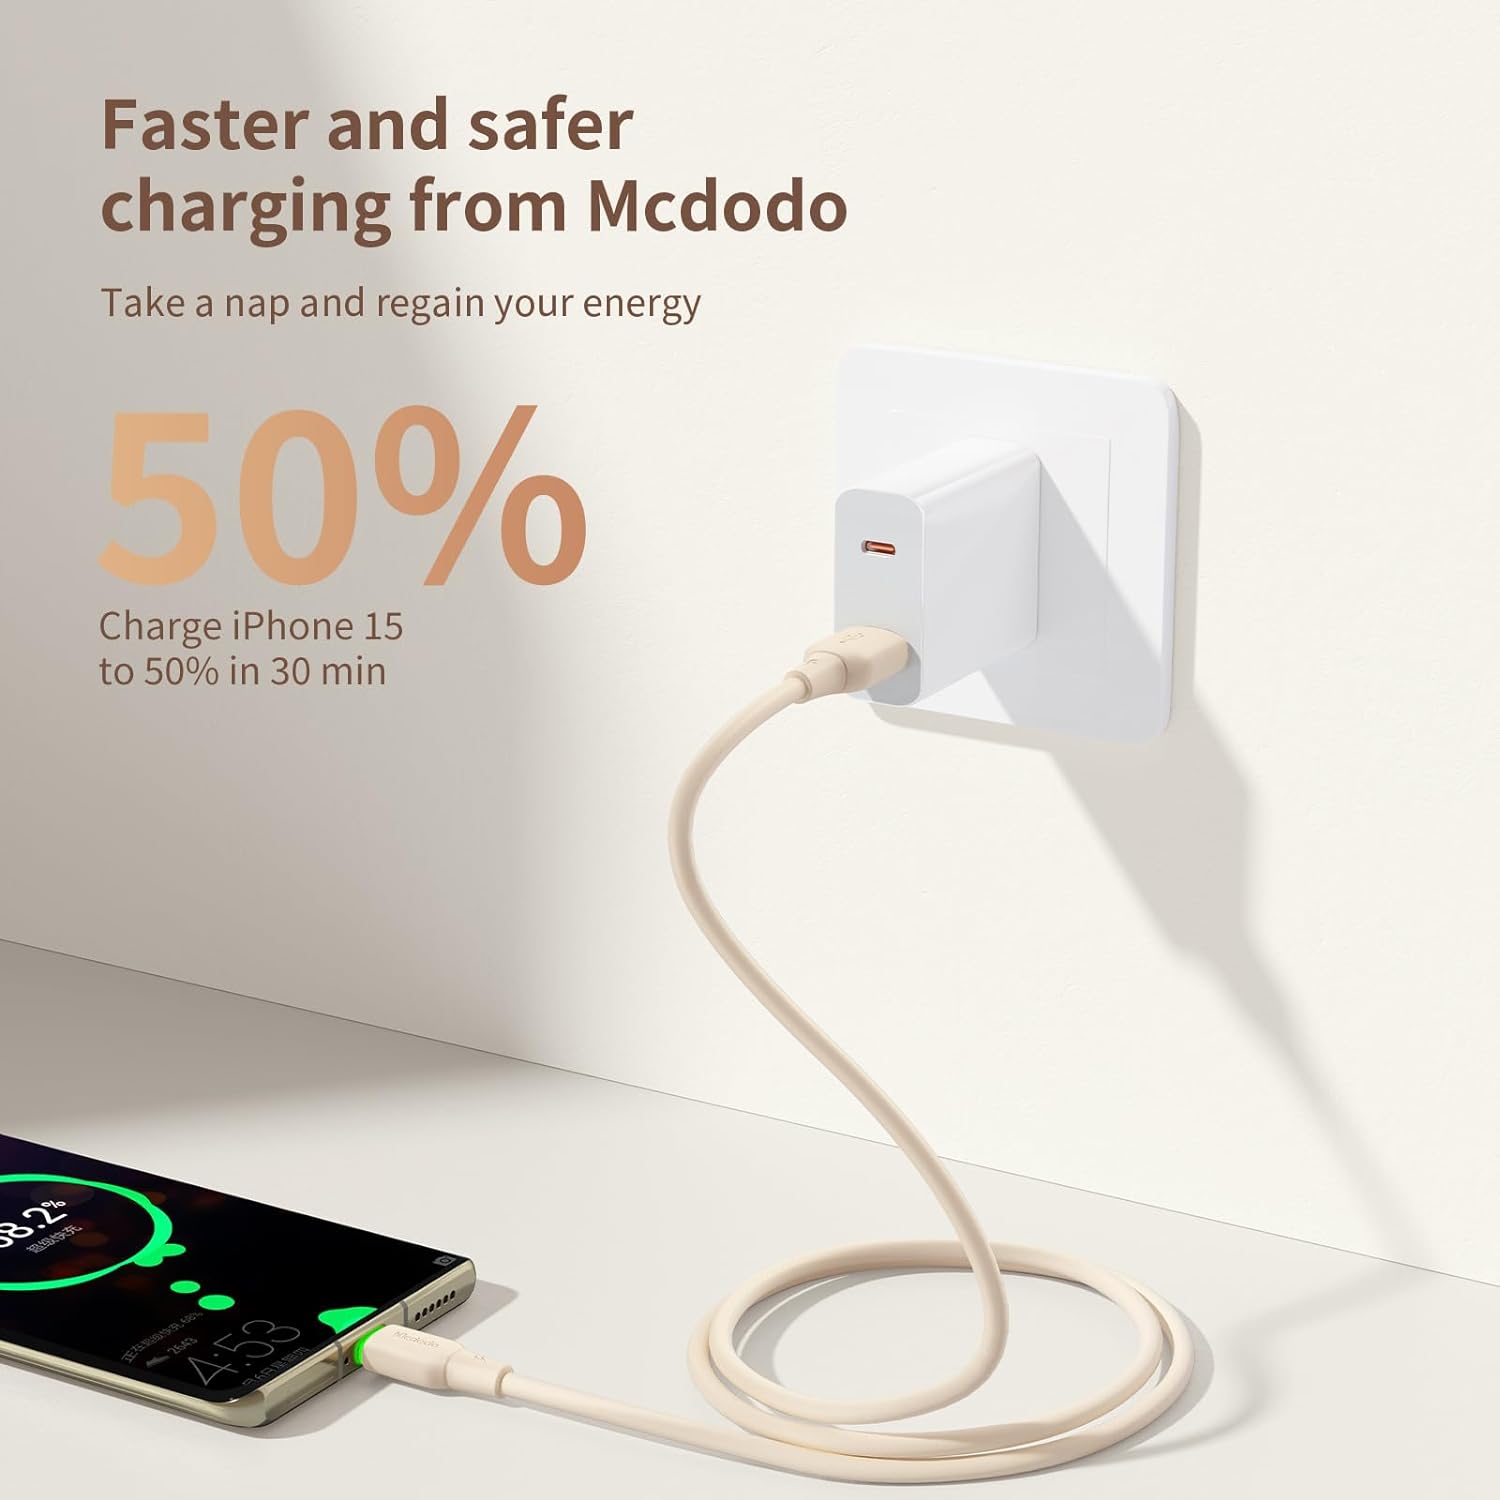 mcdodo USB A to USB C Charger Cable 4ft Type C Fast Charging Cord Soft Flow Material USBC Charger for iPhone 15 Pro Max Plus Samsung S23 Note 20 iPad Pro Air Mini MacBook Air(Off-White)